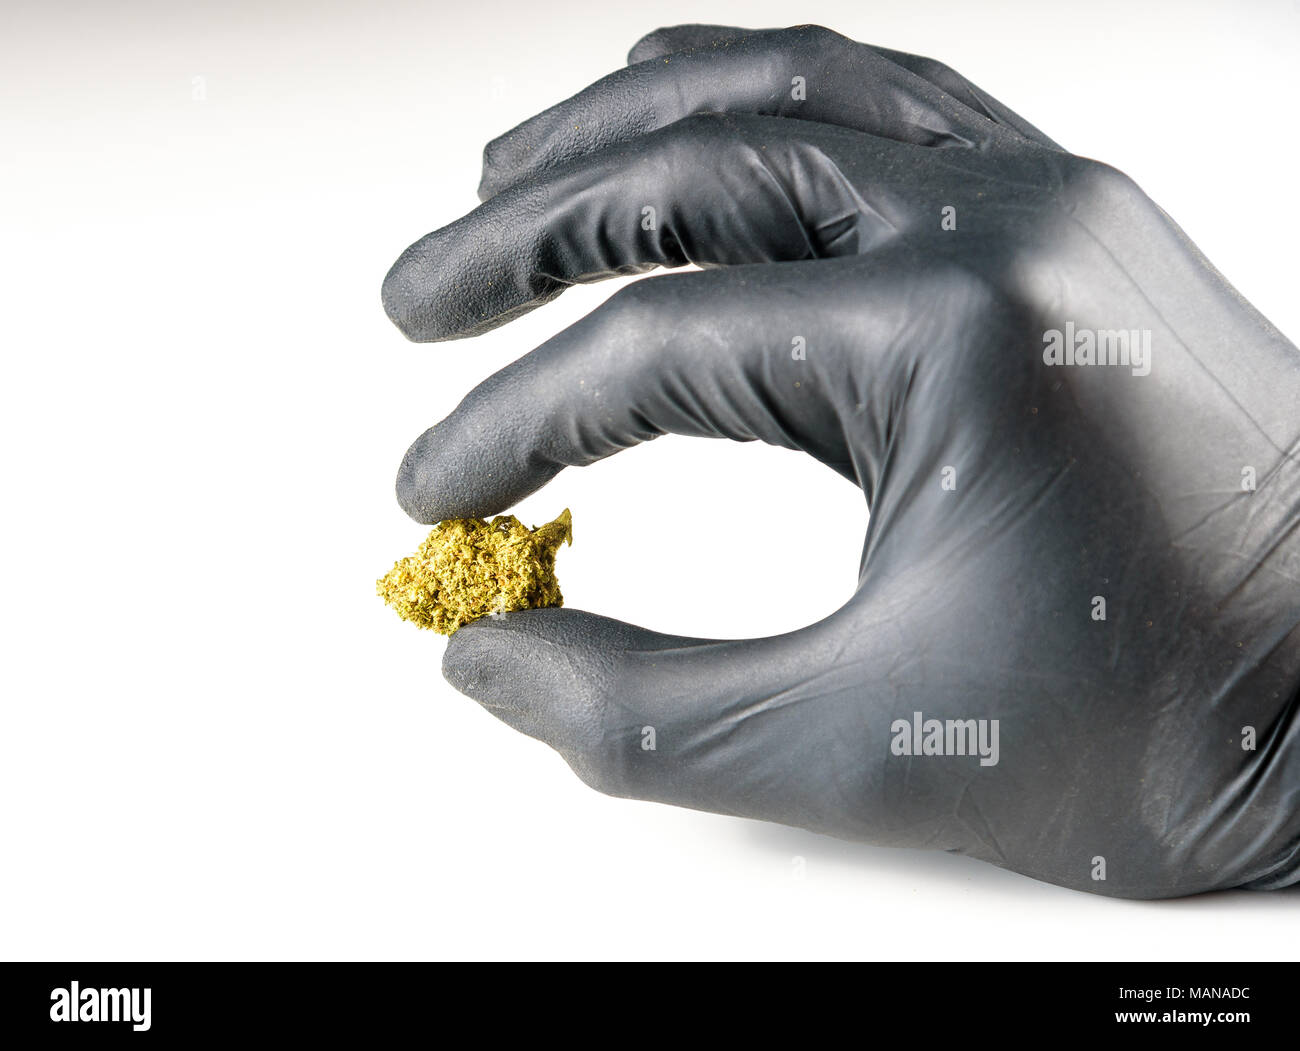 Medicinal marijuana being held by a black latex glove against a white background Stock Photo